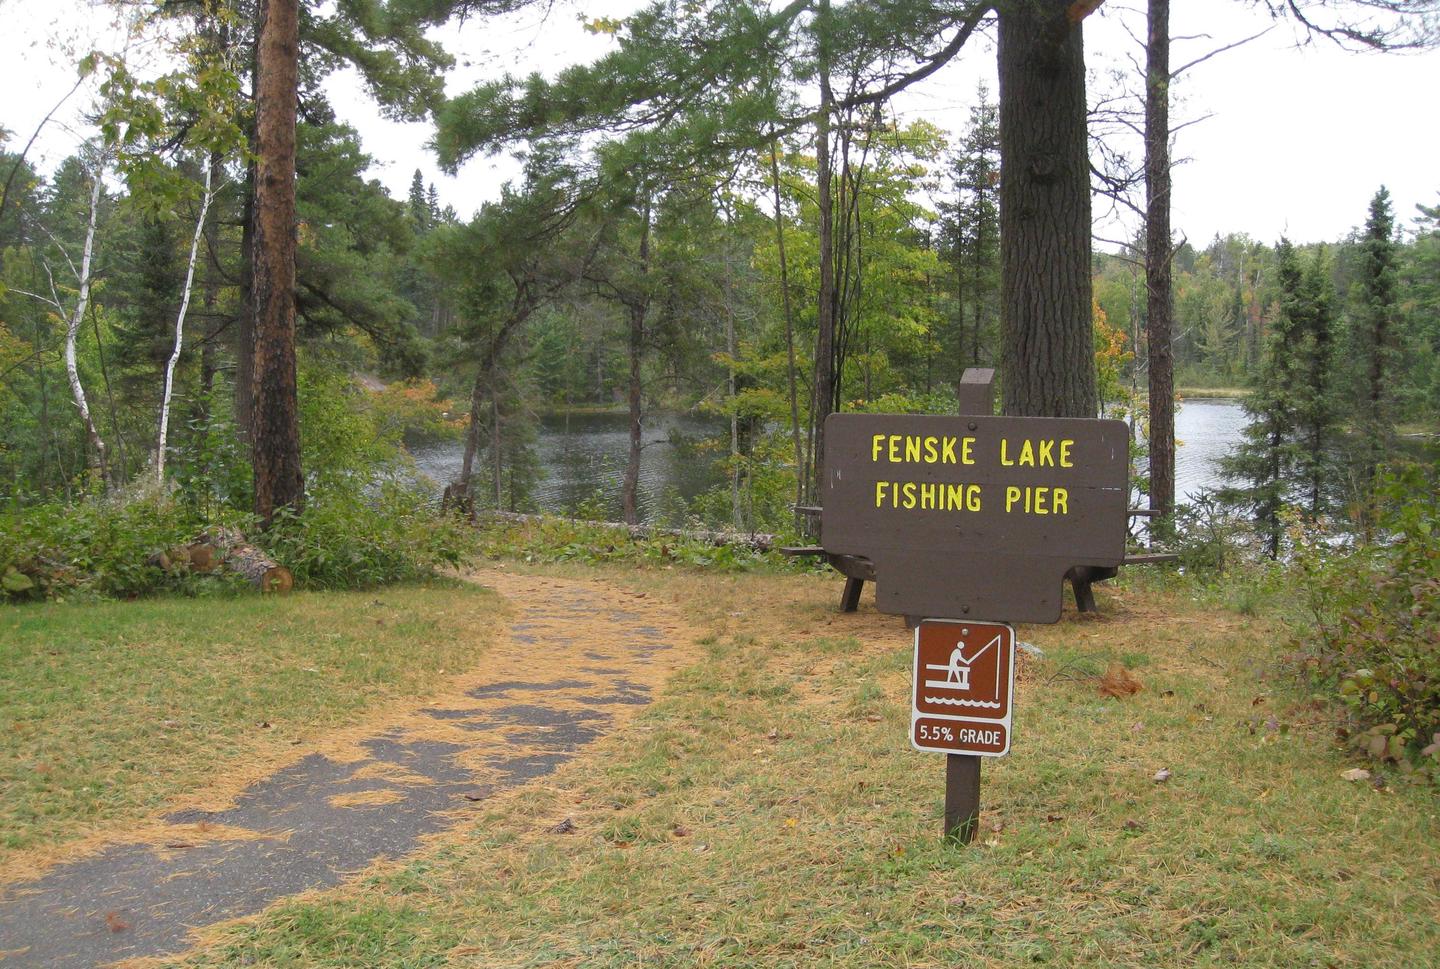 Picture of paved trail and sign.Fenske Lake fishing pier access trail.  Paved trail provides access to the fishing pier.